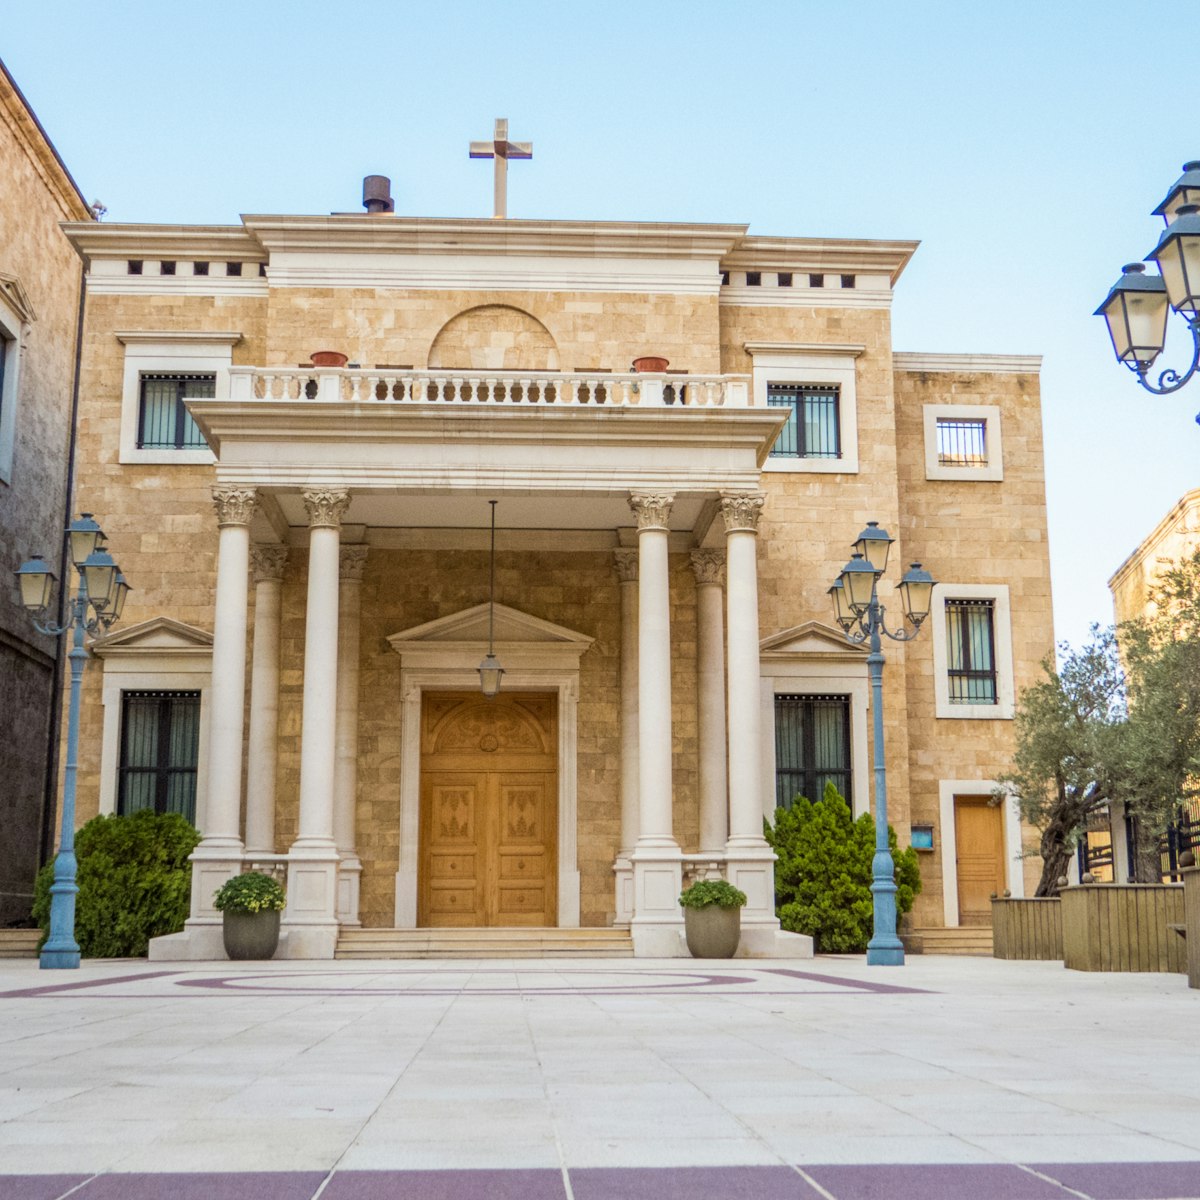 Saint George Maronite Greek Orthodox Cathedral in Beirut, Lebanon ; Shutterstock ID 764709994; Your name (First / Last): Lauren Keith; GL account no.: 65050; Netsuite department name: Online Editorial; Full Product or Project name including edition: Beirut Guides app update